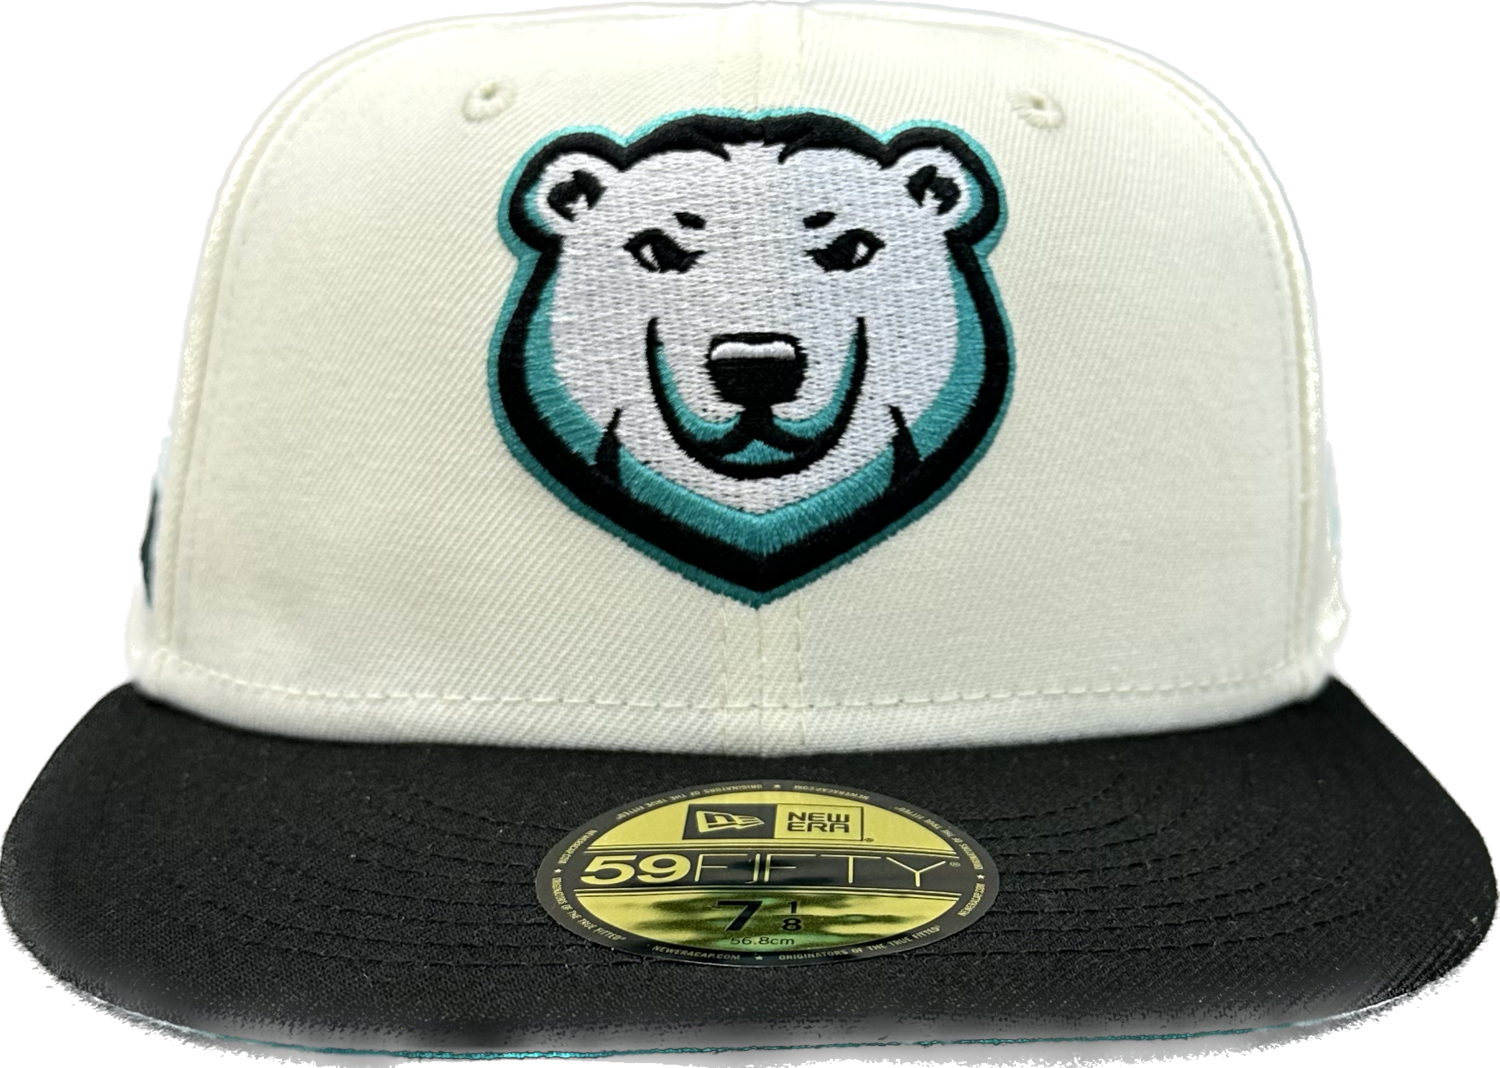 New Era 59Fifty Fitted Hat - Cream, Black, Teal